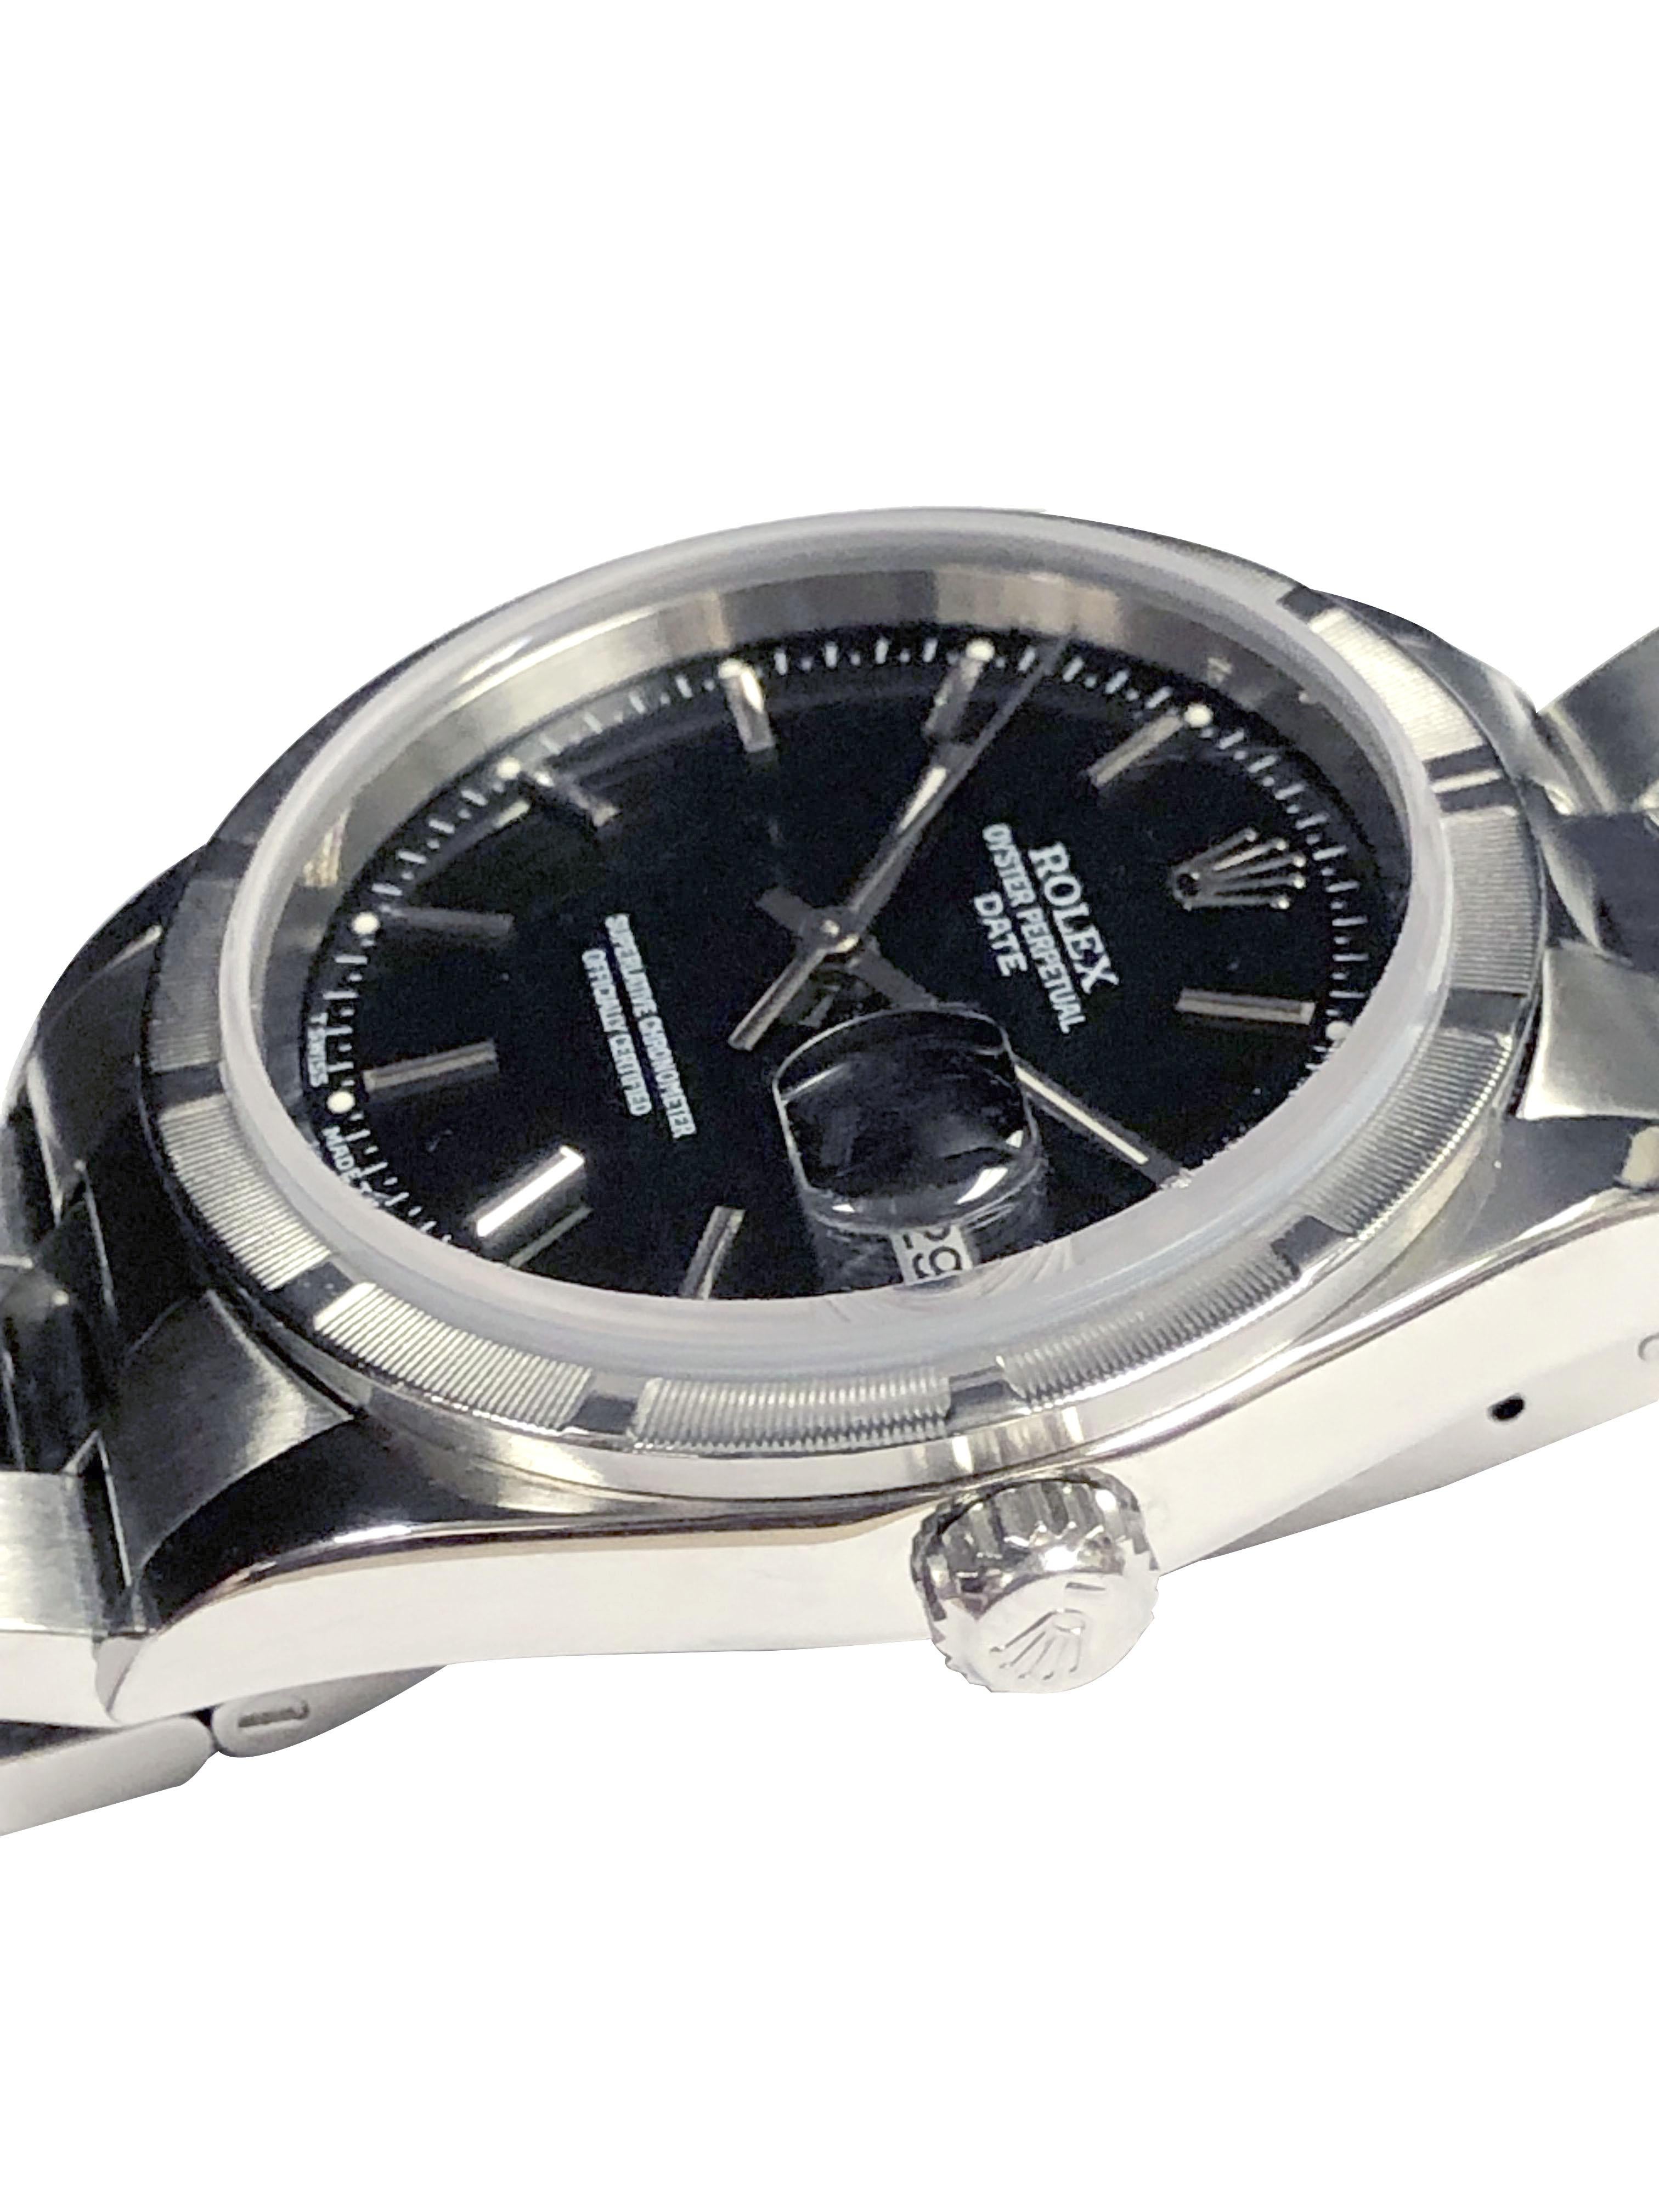 Circa 2000 Rolex Date Model Wrist Watch, 34 M.M. Stainless Steel 3 Piece case with Engine Turned Bezel, Caliber 3135 Automatic, self winding movement. Black Dial with Raised Silver Baton Markers, sweep seconds hand and a Calendar window st the 3